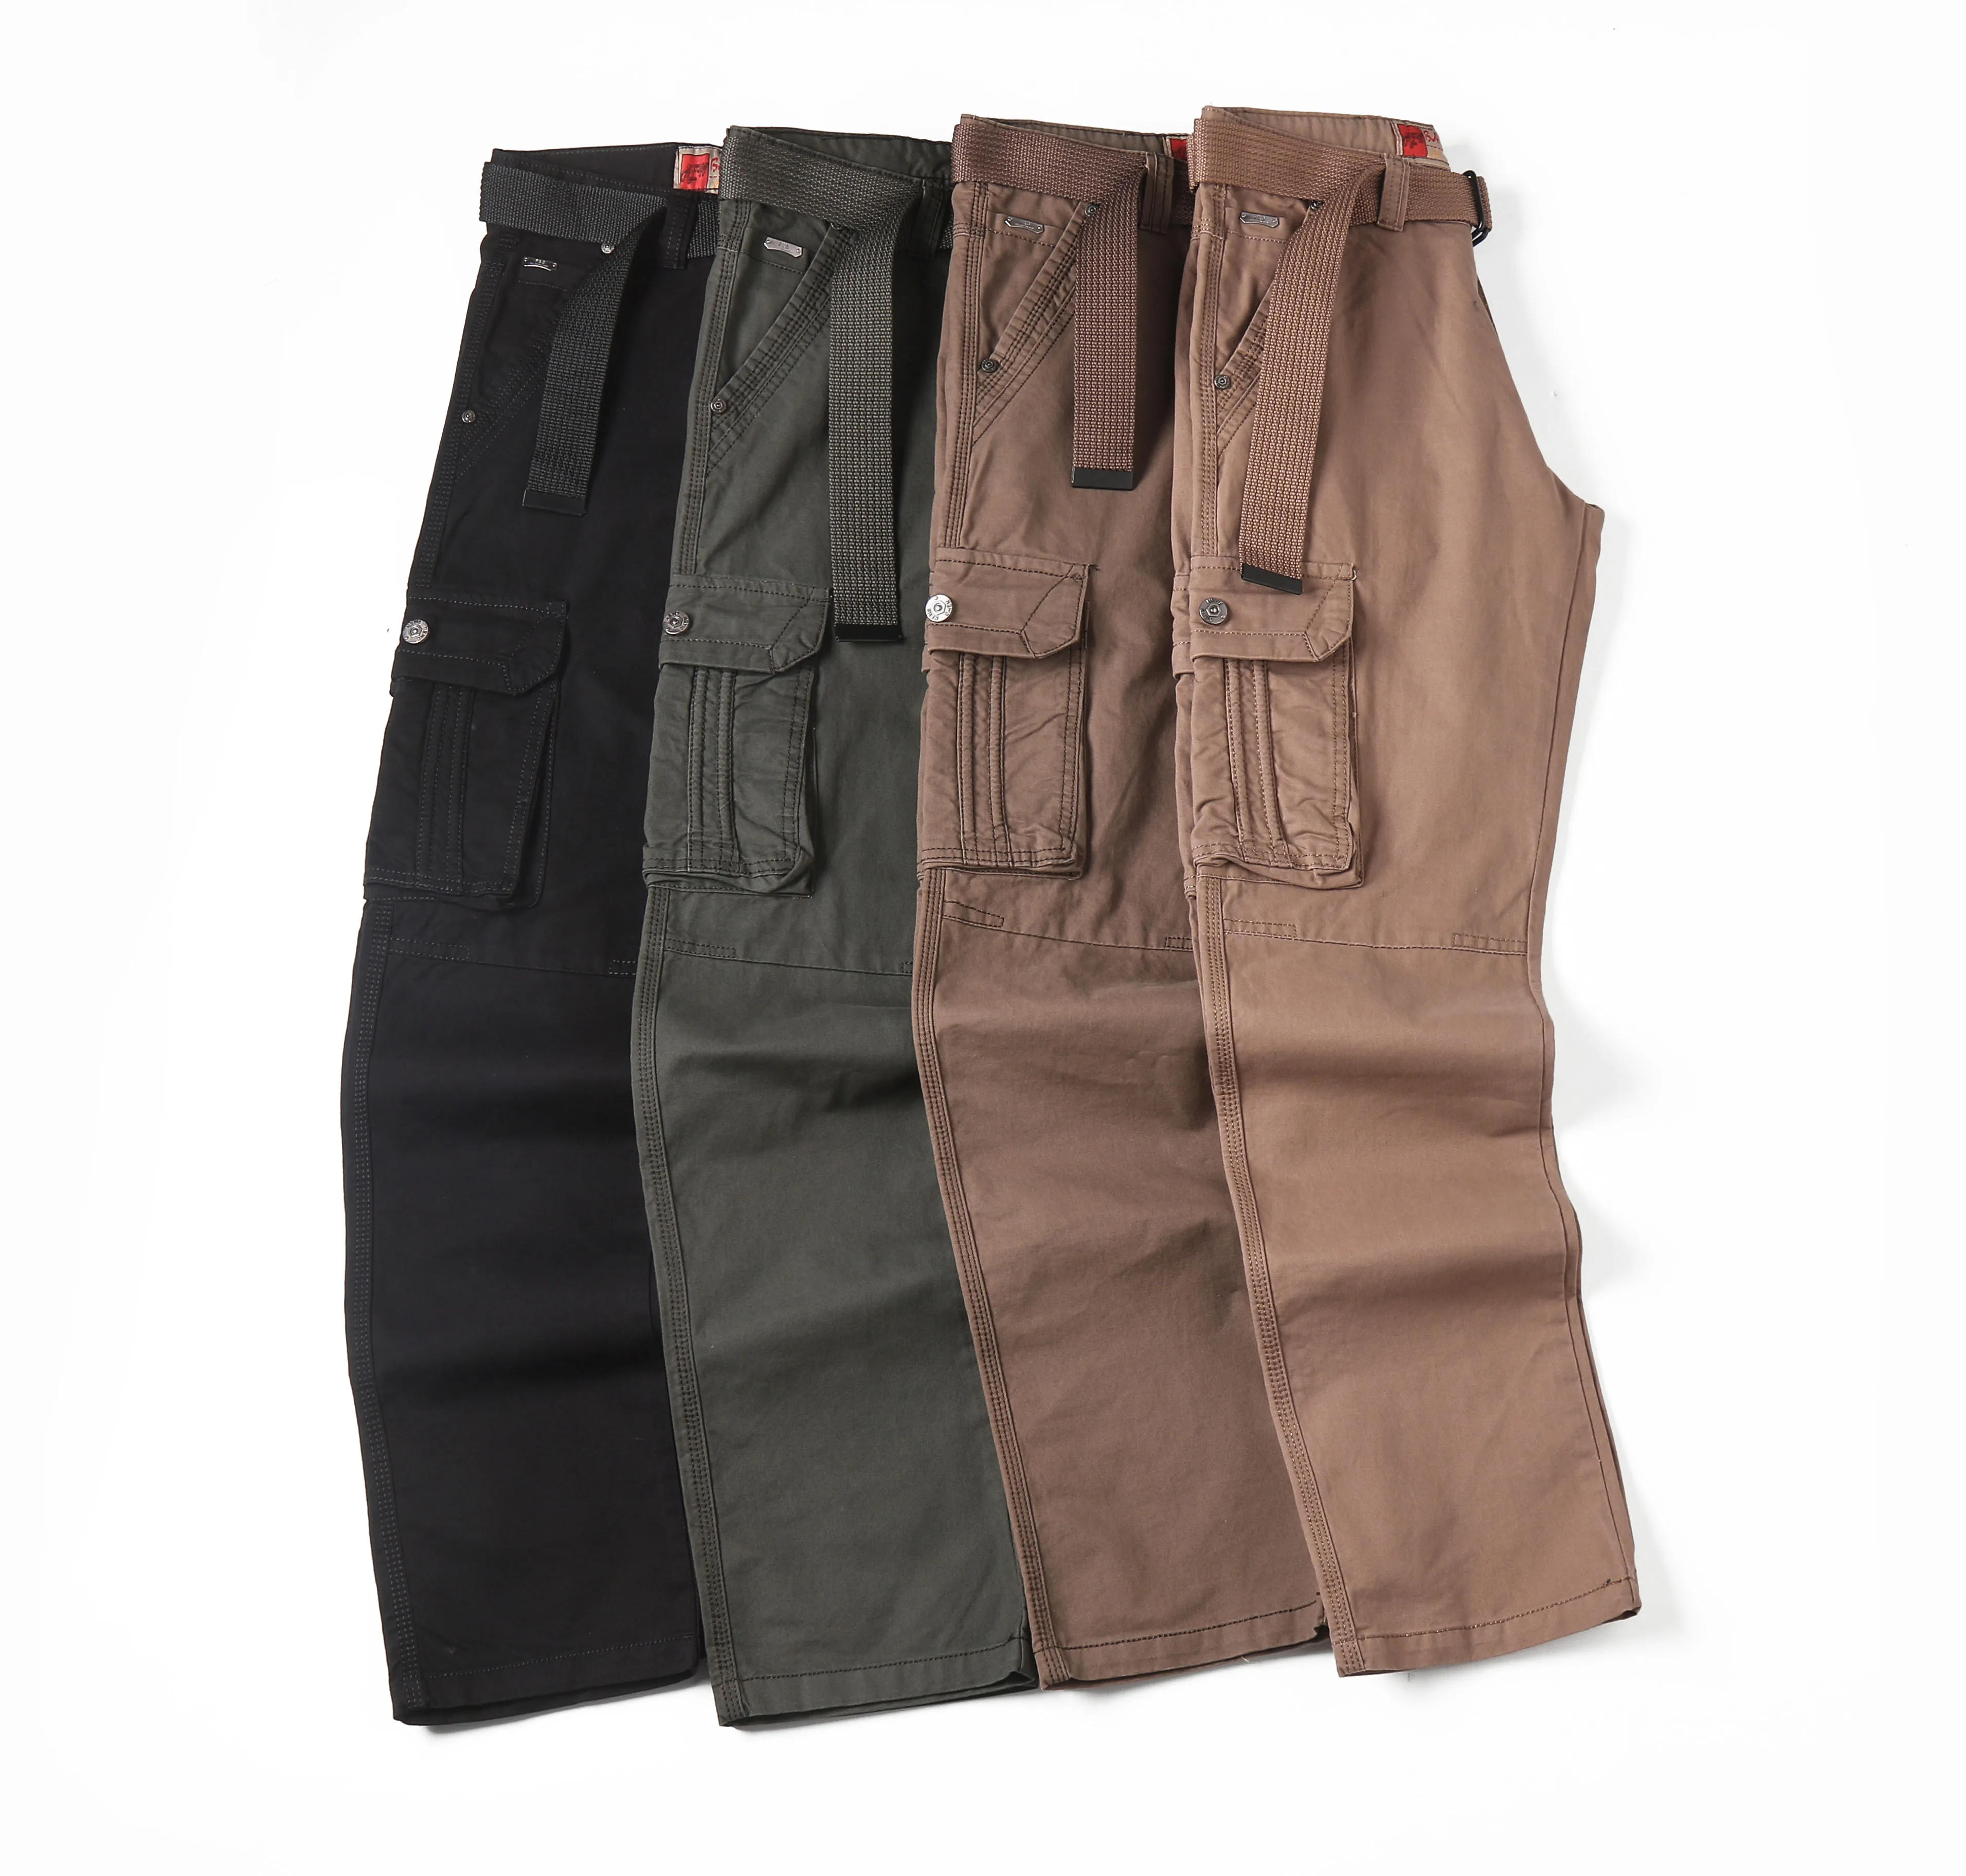 

Fashionable men's trousers cargo pants men multi pocket chino casual pants with ankle zipper, Customers' requests